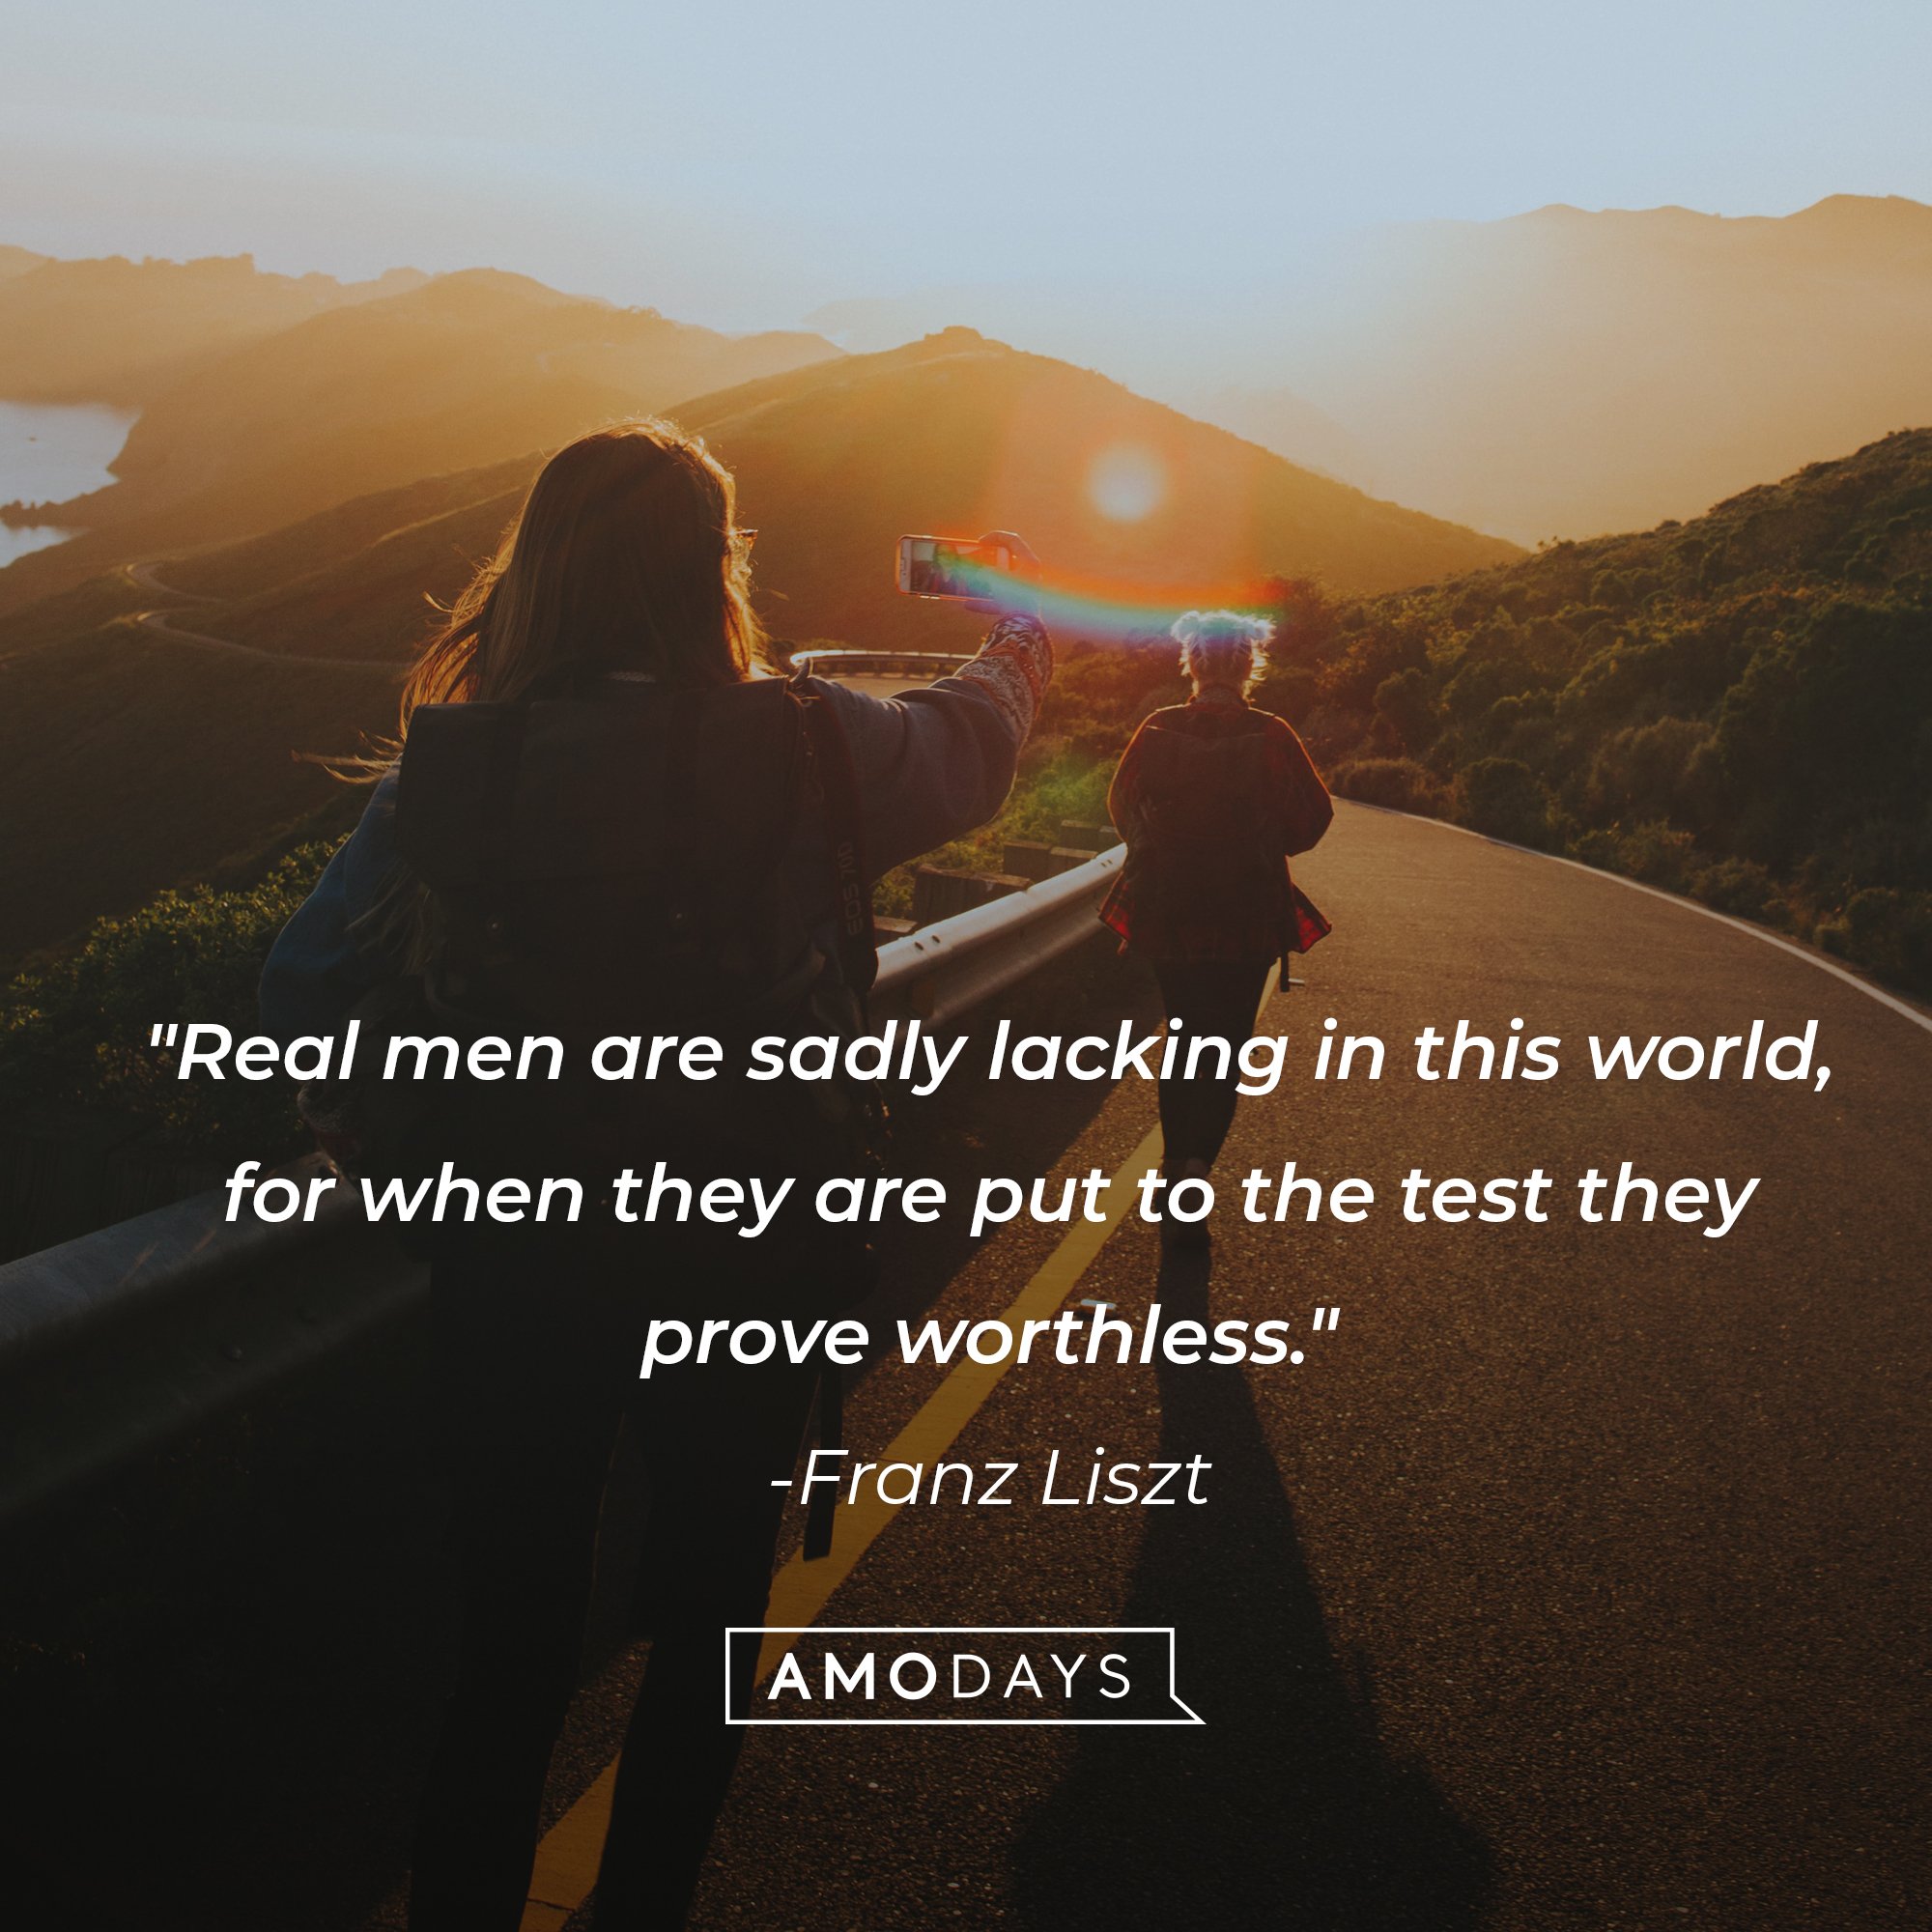 Franz Liszt's quote: "Real men are sadly lacking in this world, for when they are put to the test they prove worthless." | Image: AmoDays